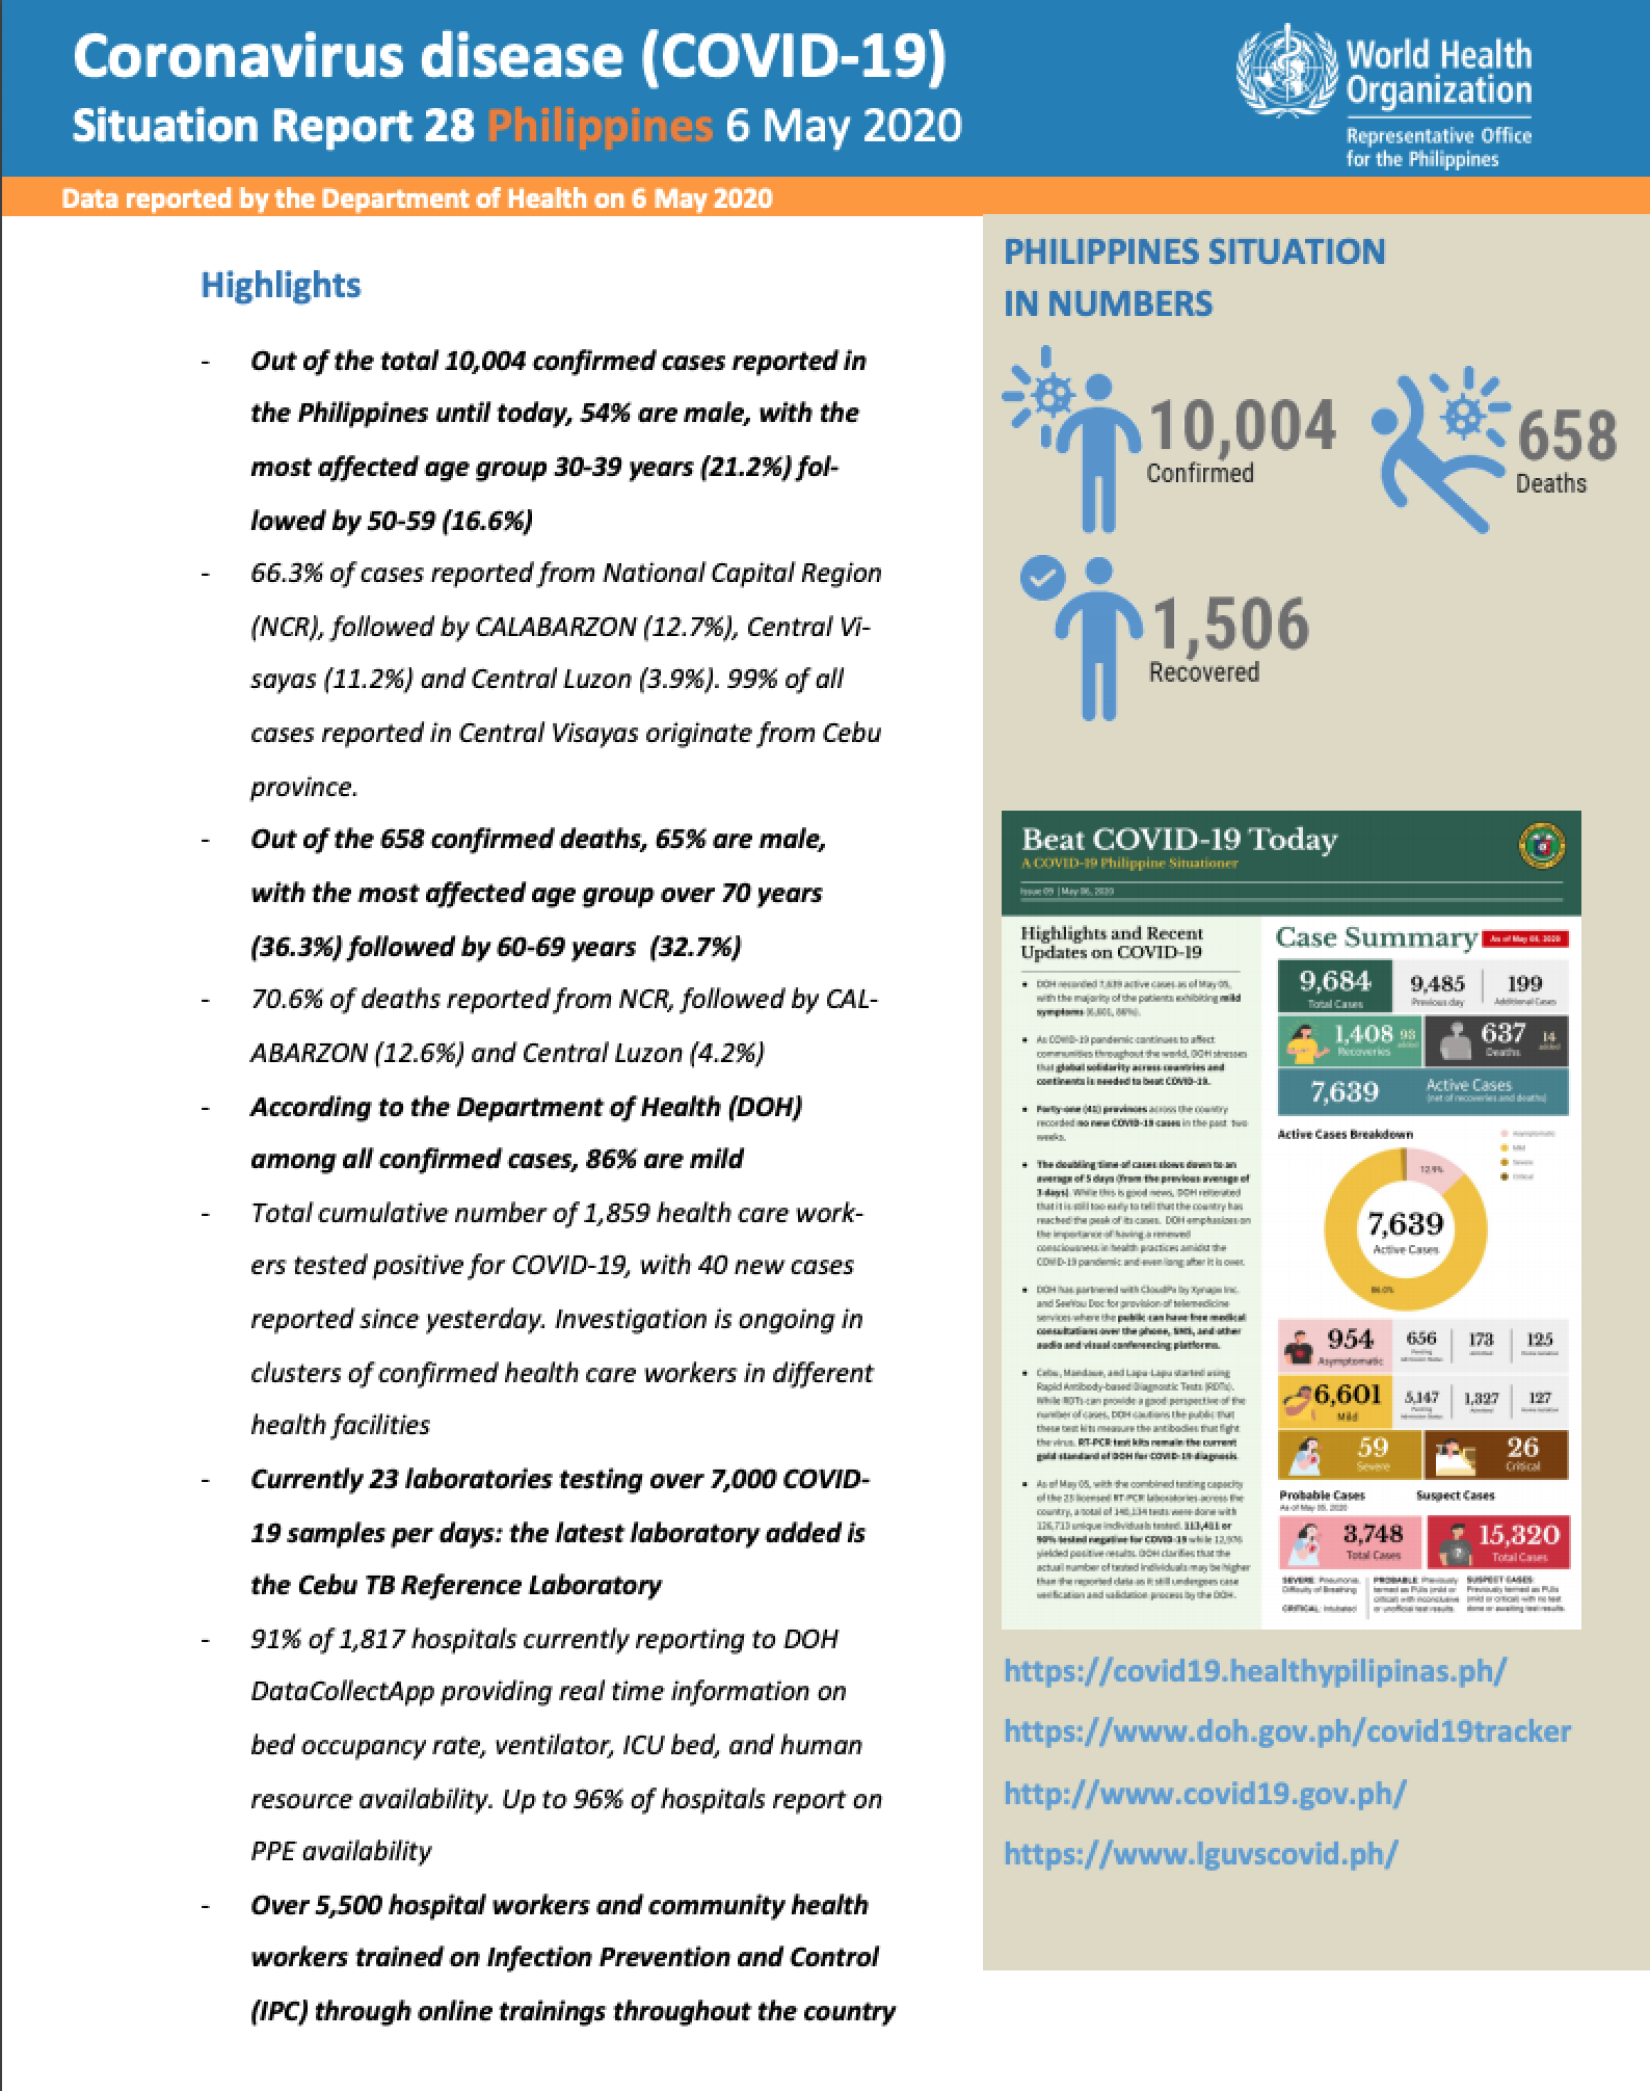 WHO COVID-19 Philippines Situation Report 28 (6 May 2020)